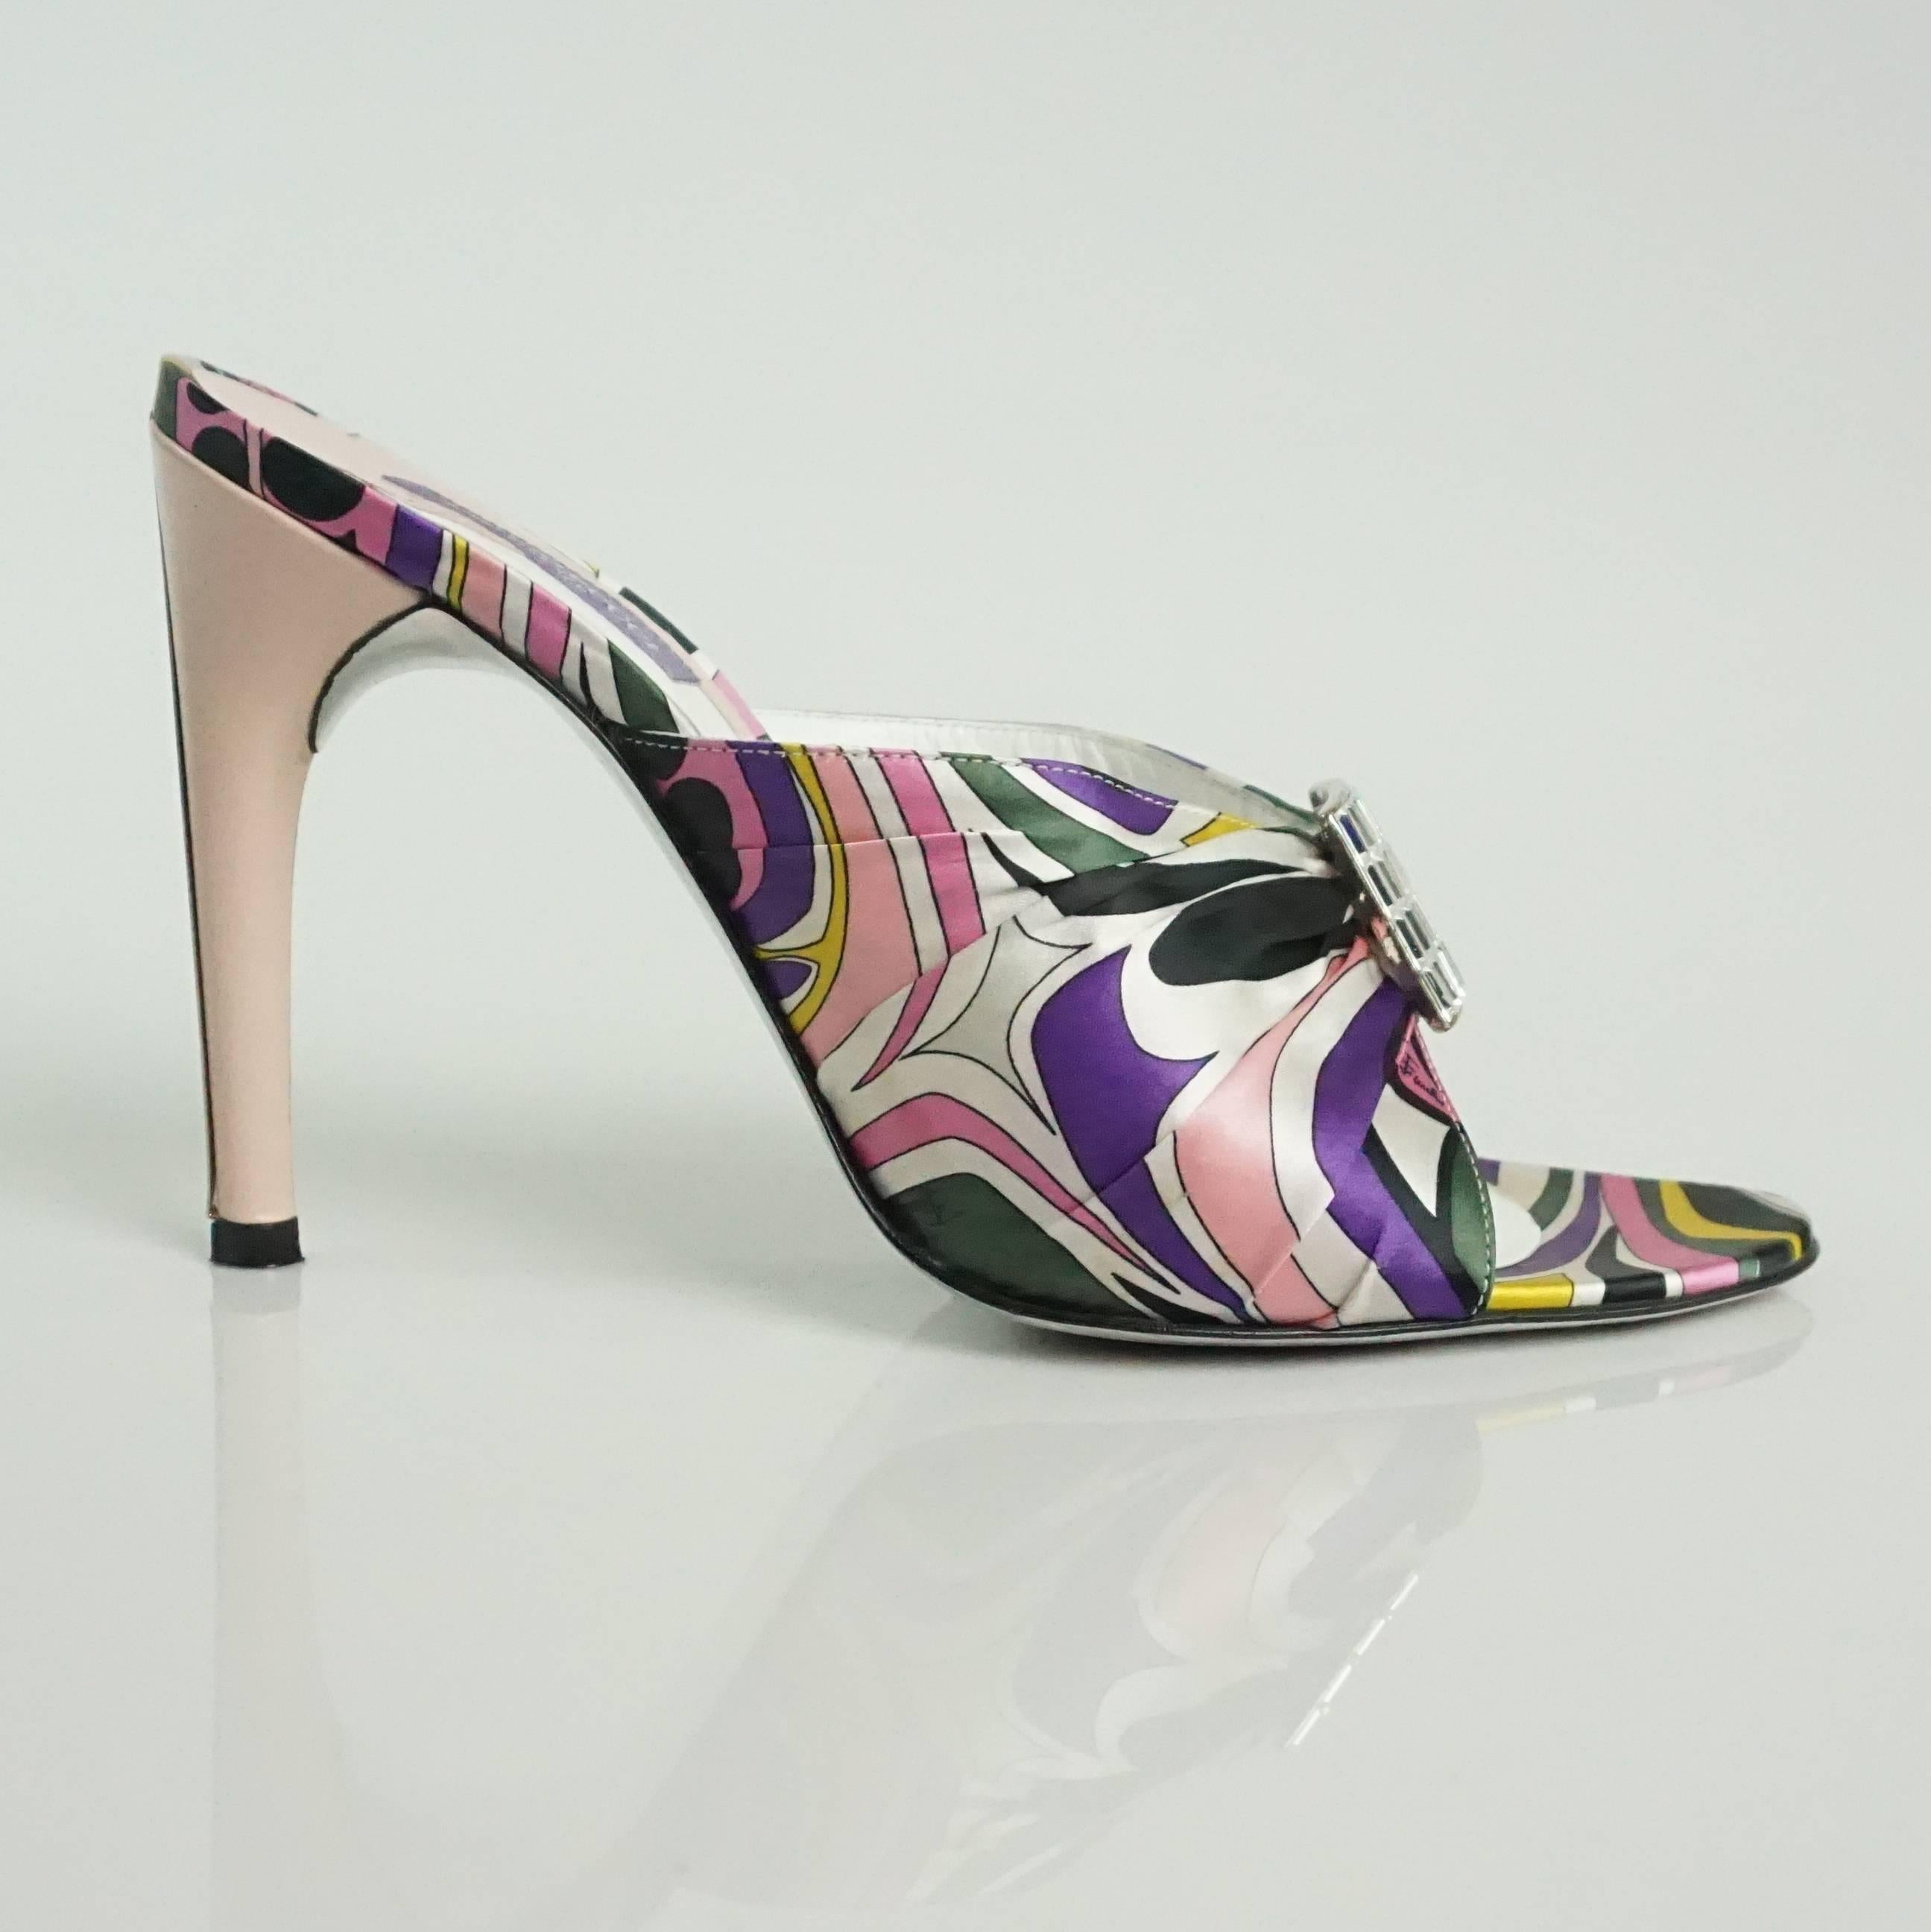 Emilio Pucci Multi Silk Slide with leather heel and rhinestone front detail-37   These spectacular looking Pucci shoes have a pink leather high heel with a silver metal detail with Emilio Pucci etched, they have a silk Pink/Purple/White and Black